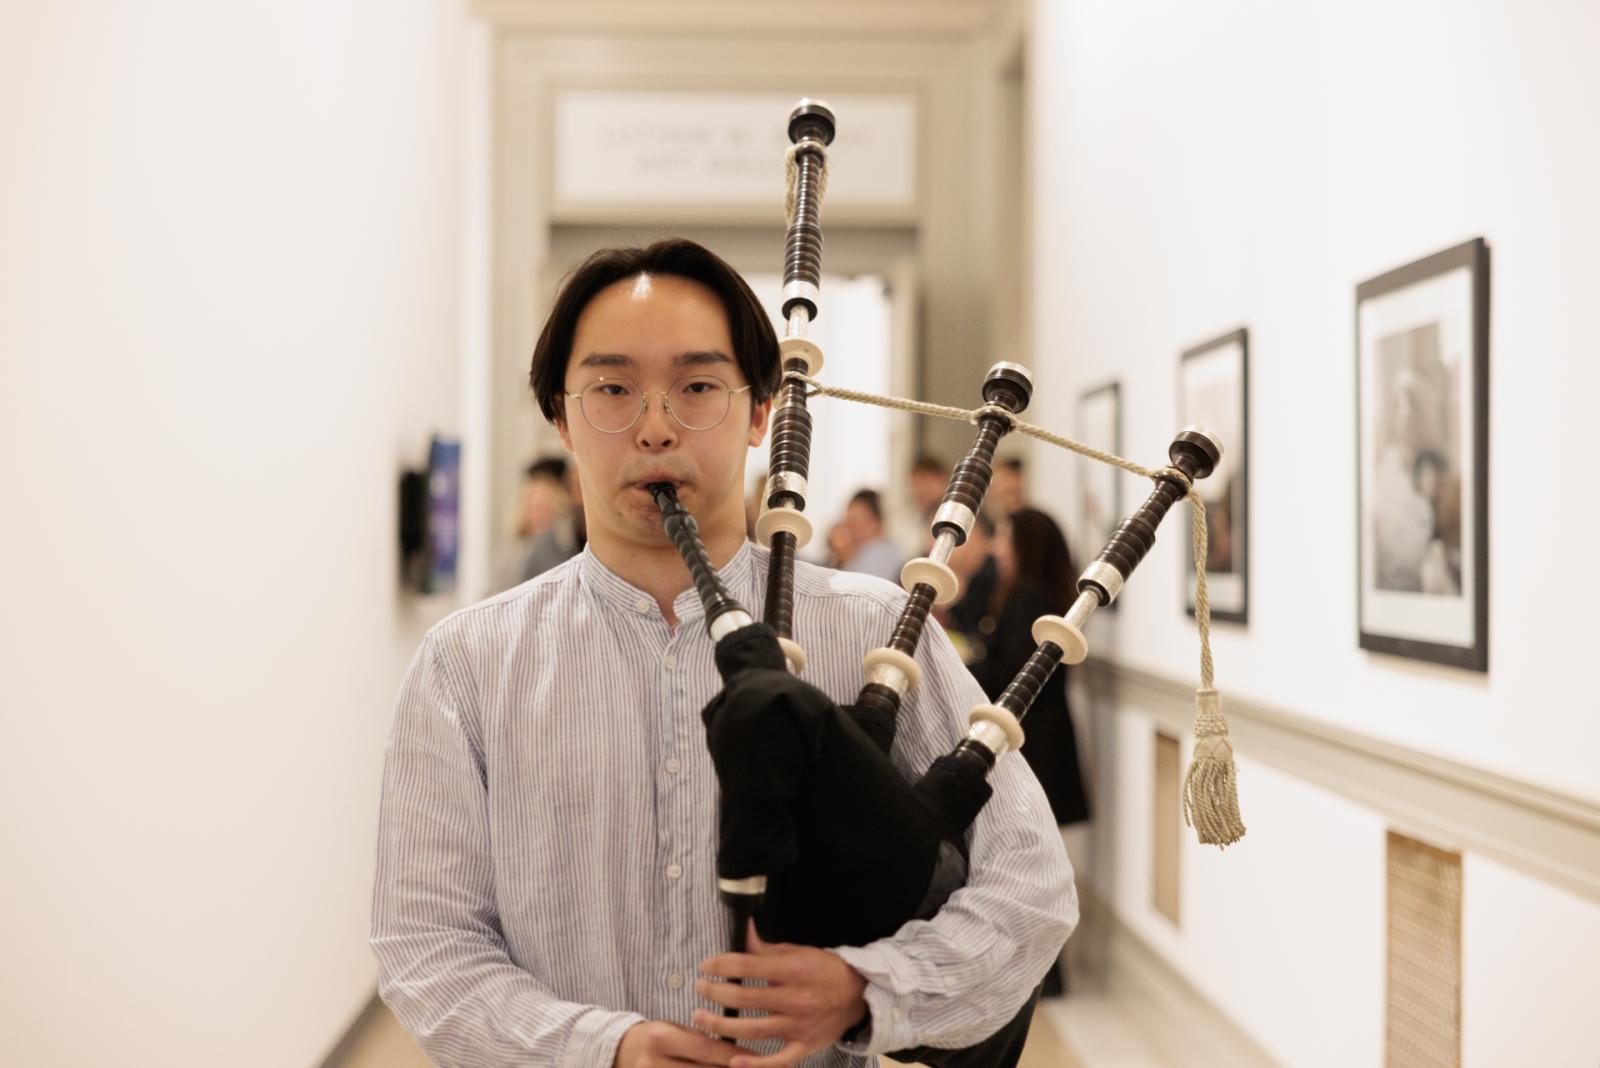 Senior student Kevin Darmadi strolled the halls playing bagpipes